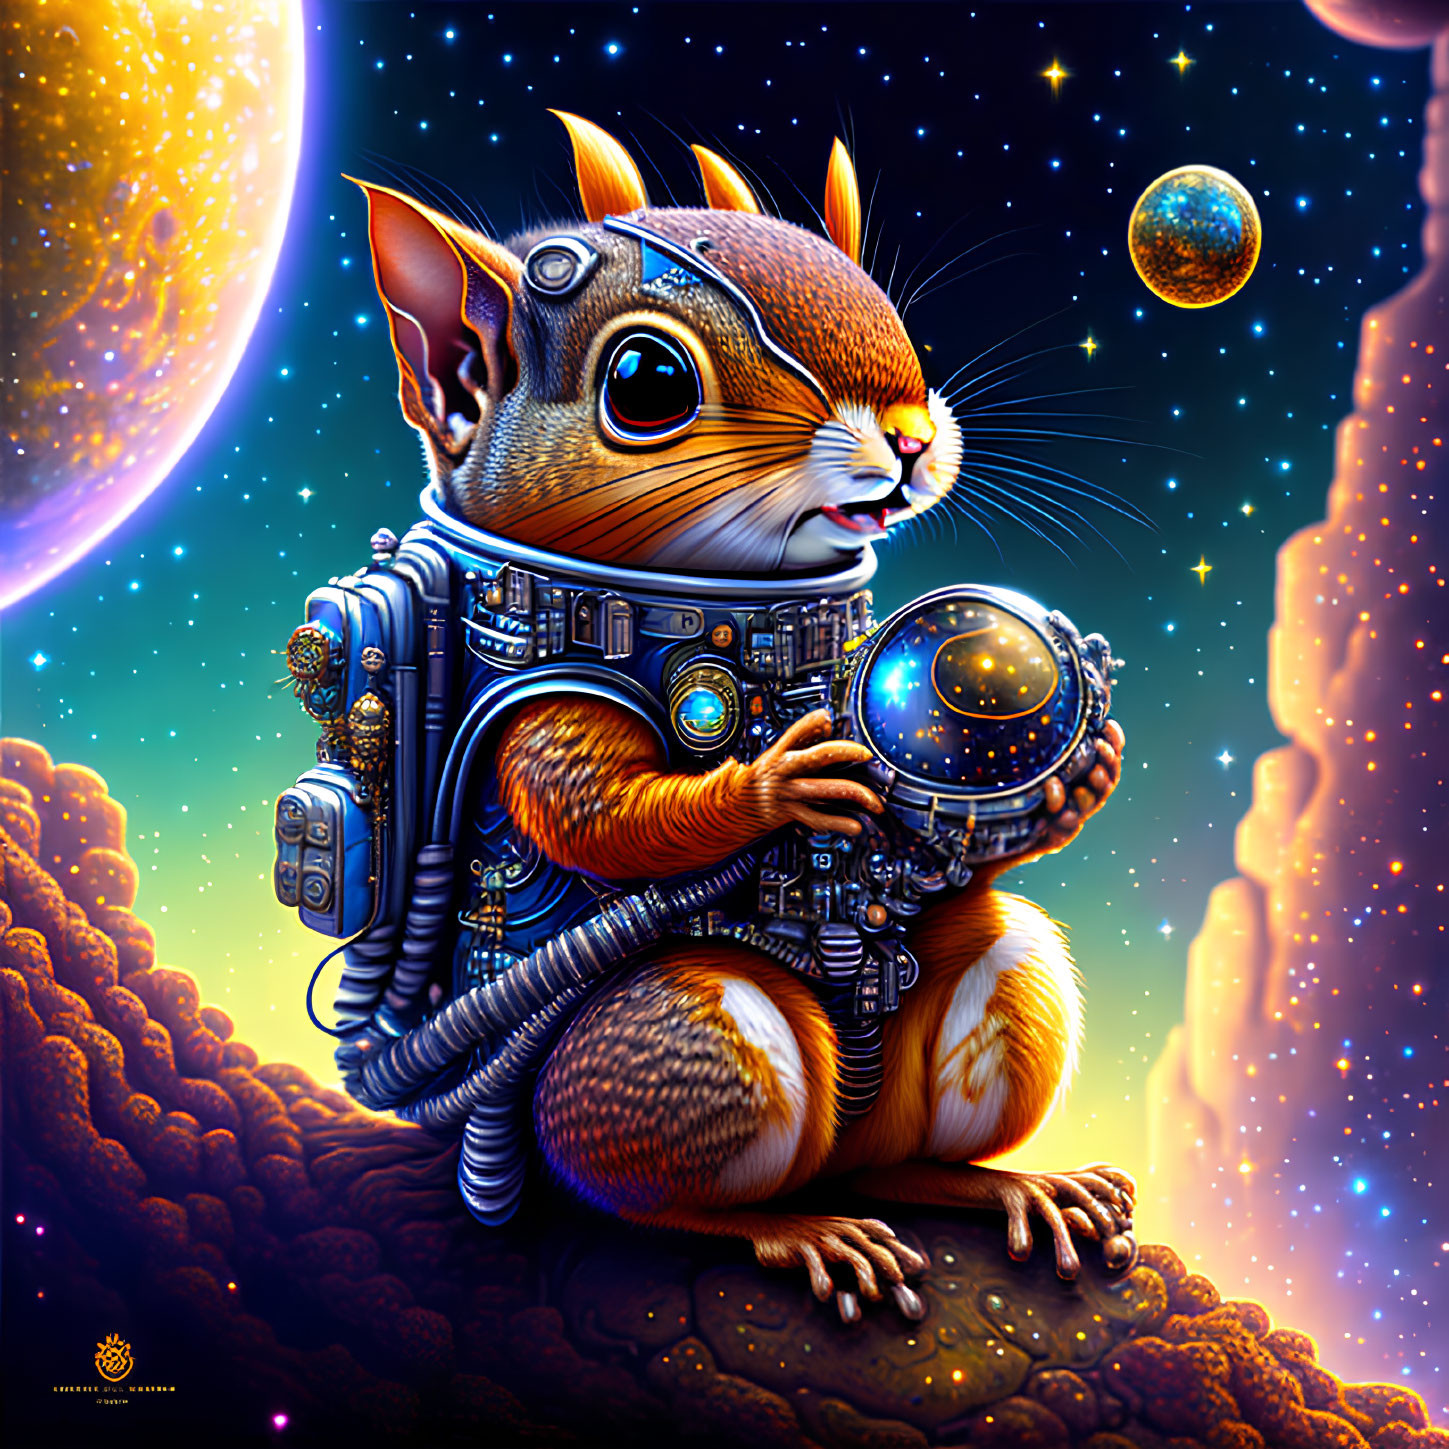 Anthropomorphic squirrel in detailed space suit with cosmic backdrop.